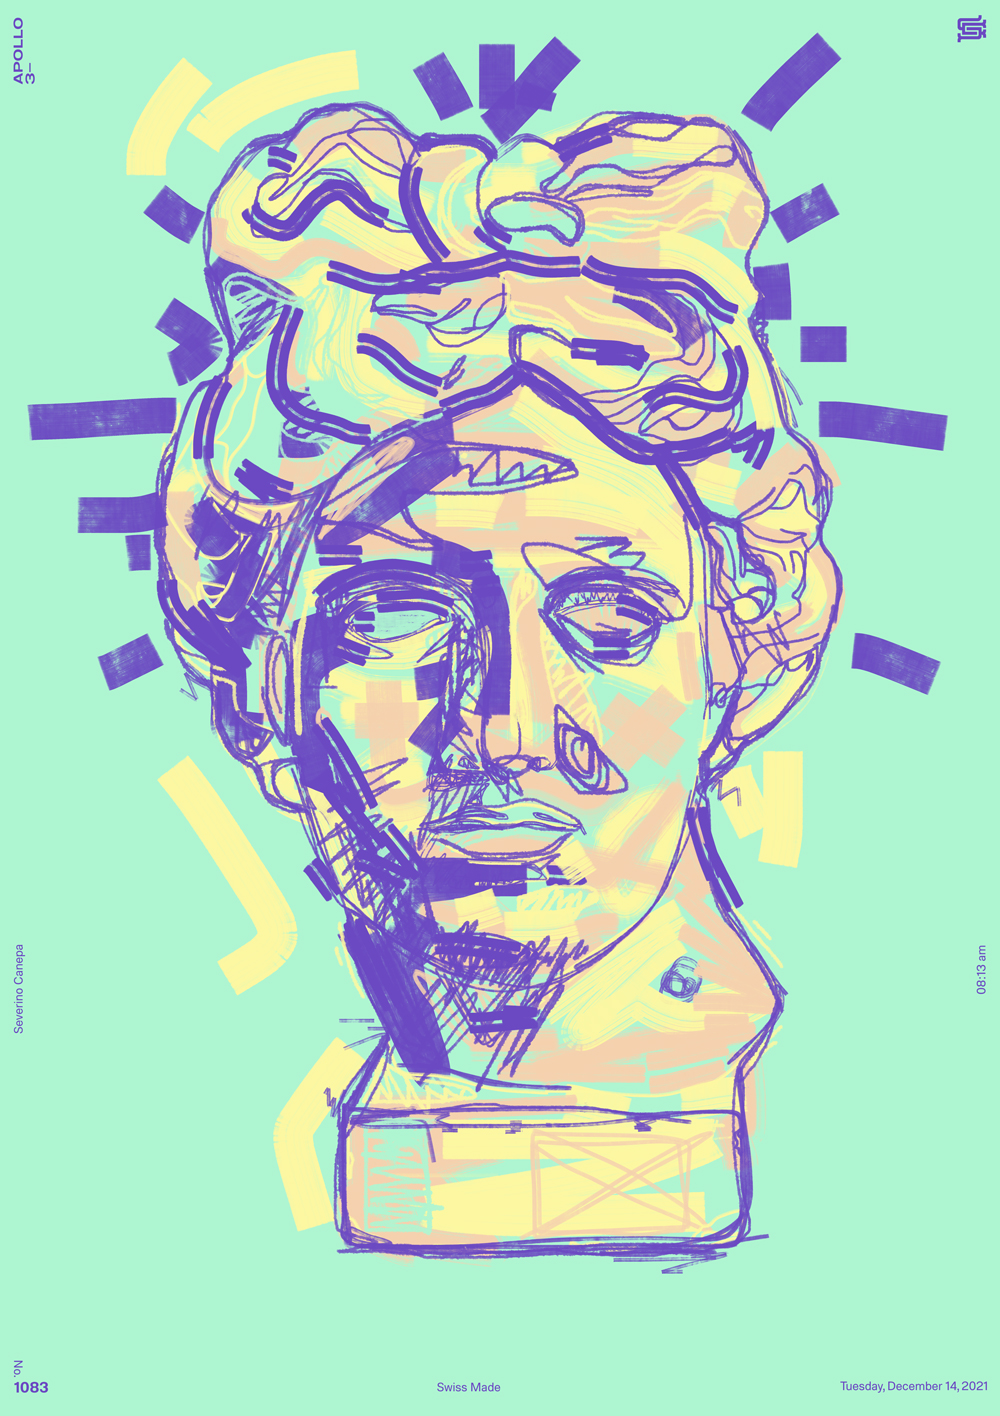 Illustration of Apollo's statue I realized with brushes